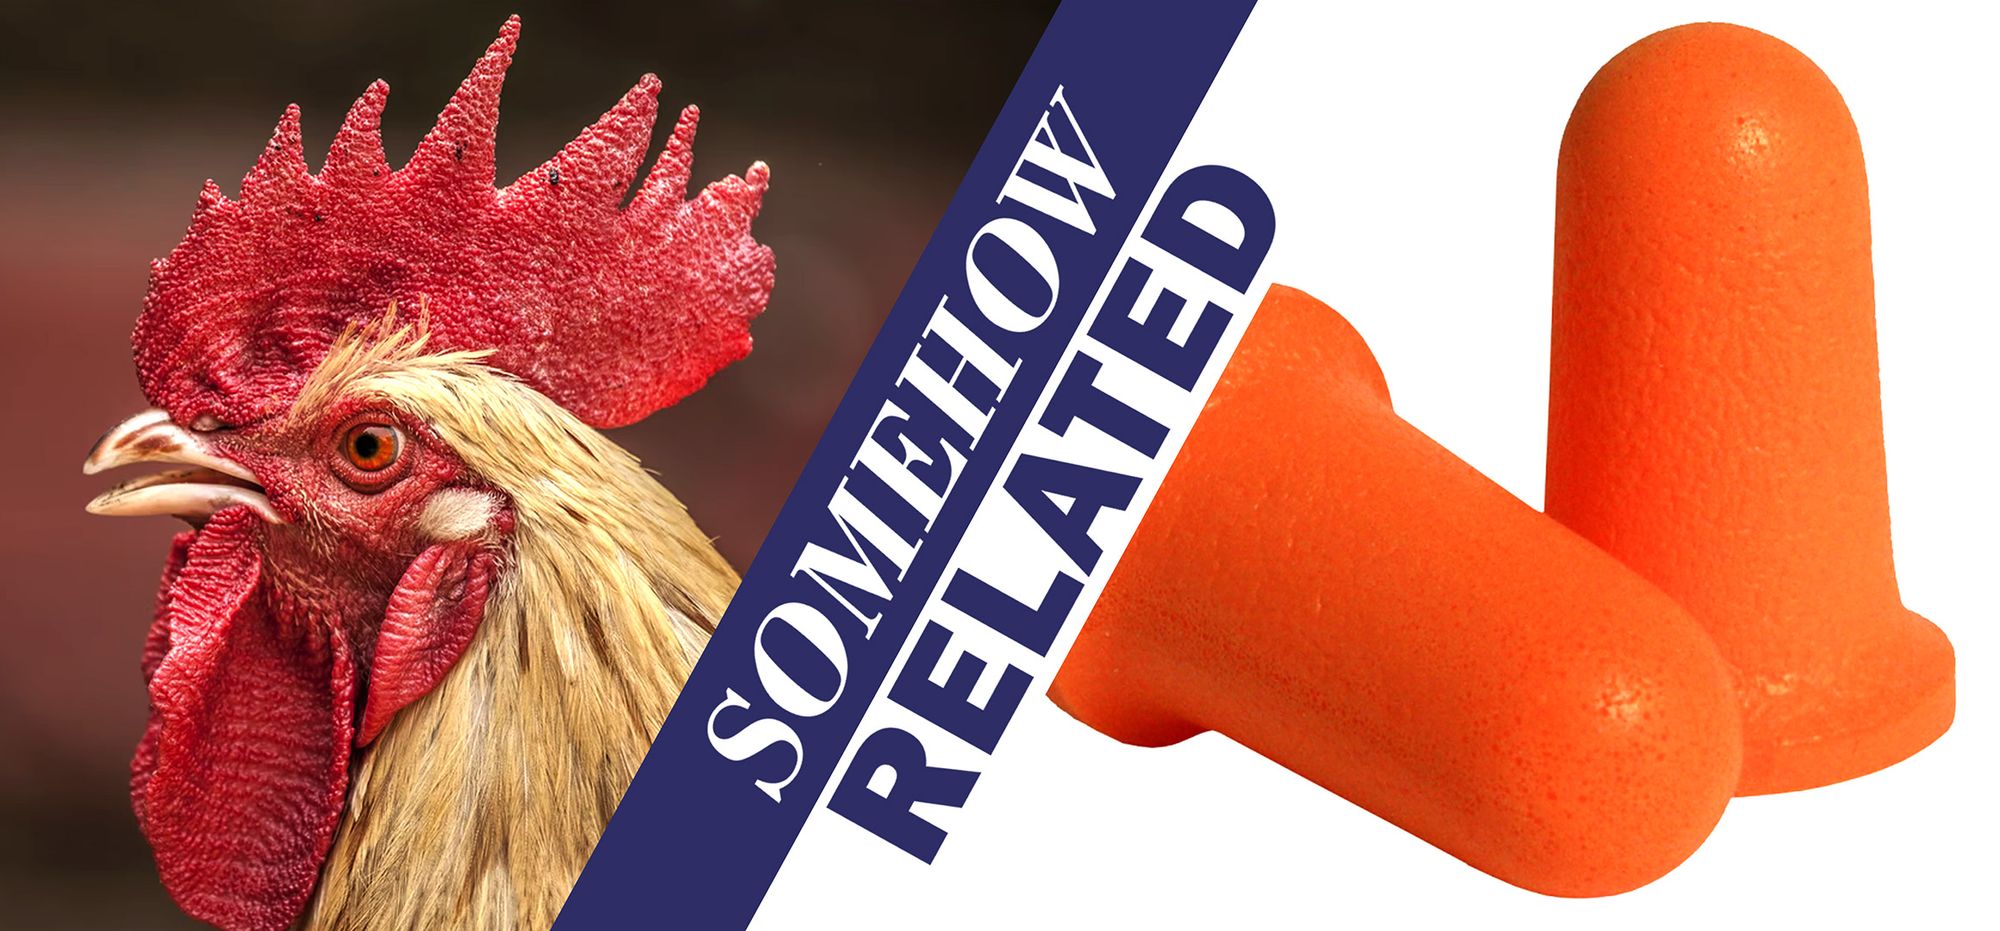 Roosters and ear plugs on Somehow Related podcast with Glenn Robbins and Dave O'Neil